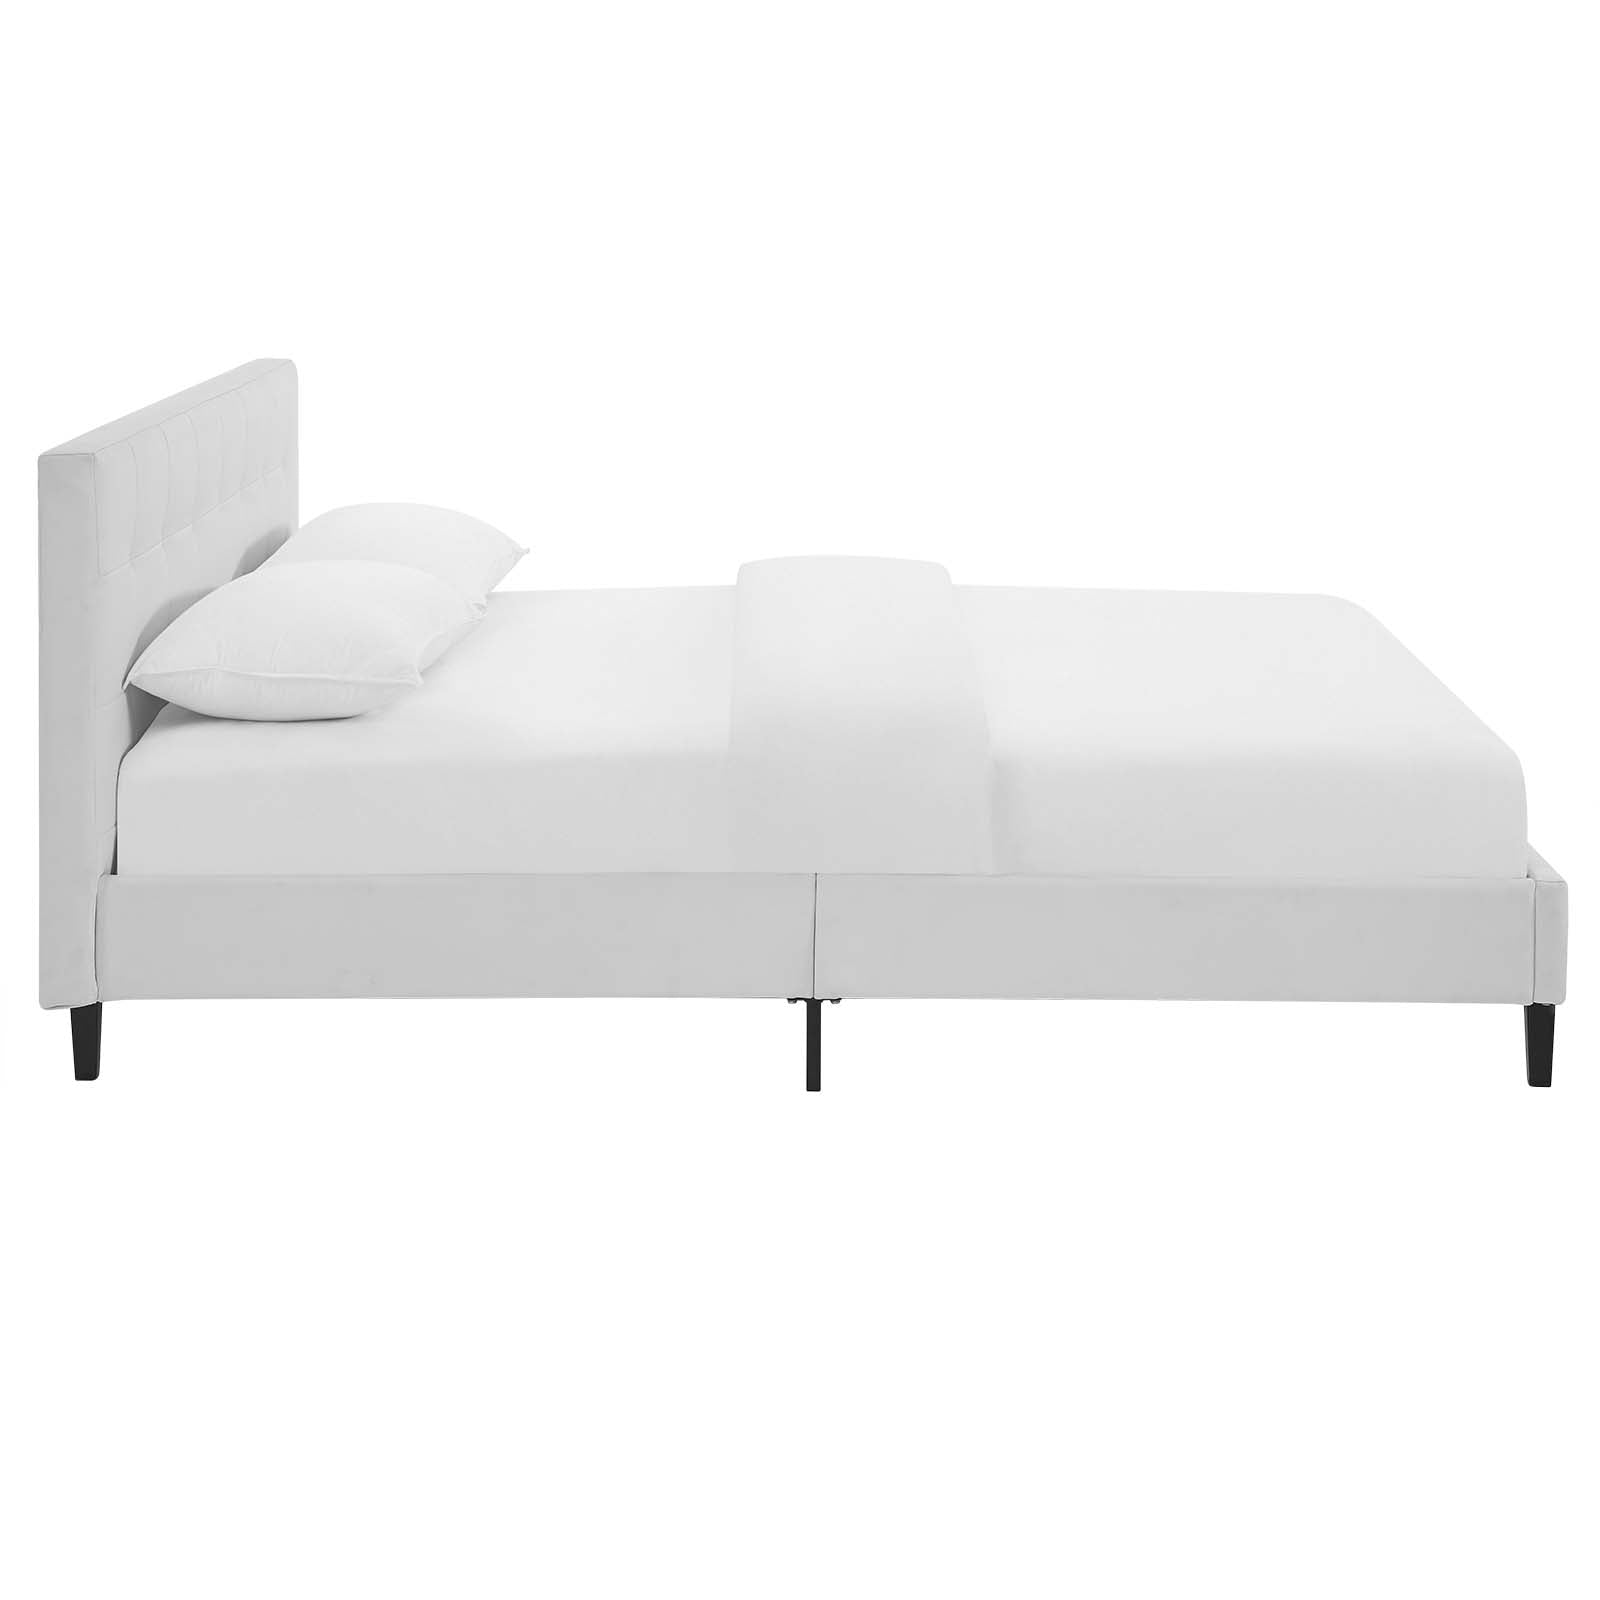 Modway Beds - Linnea Full Faux Leather Bed White